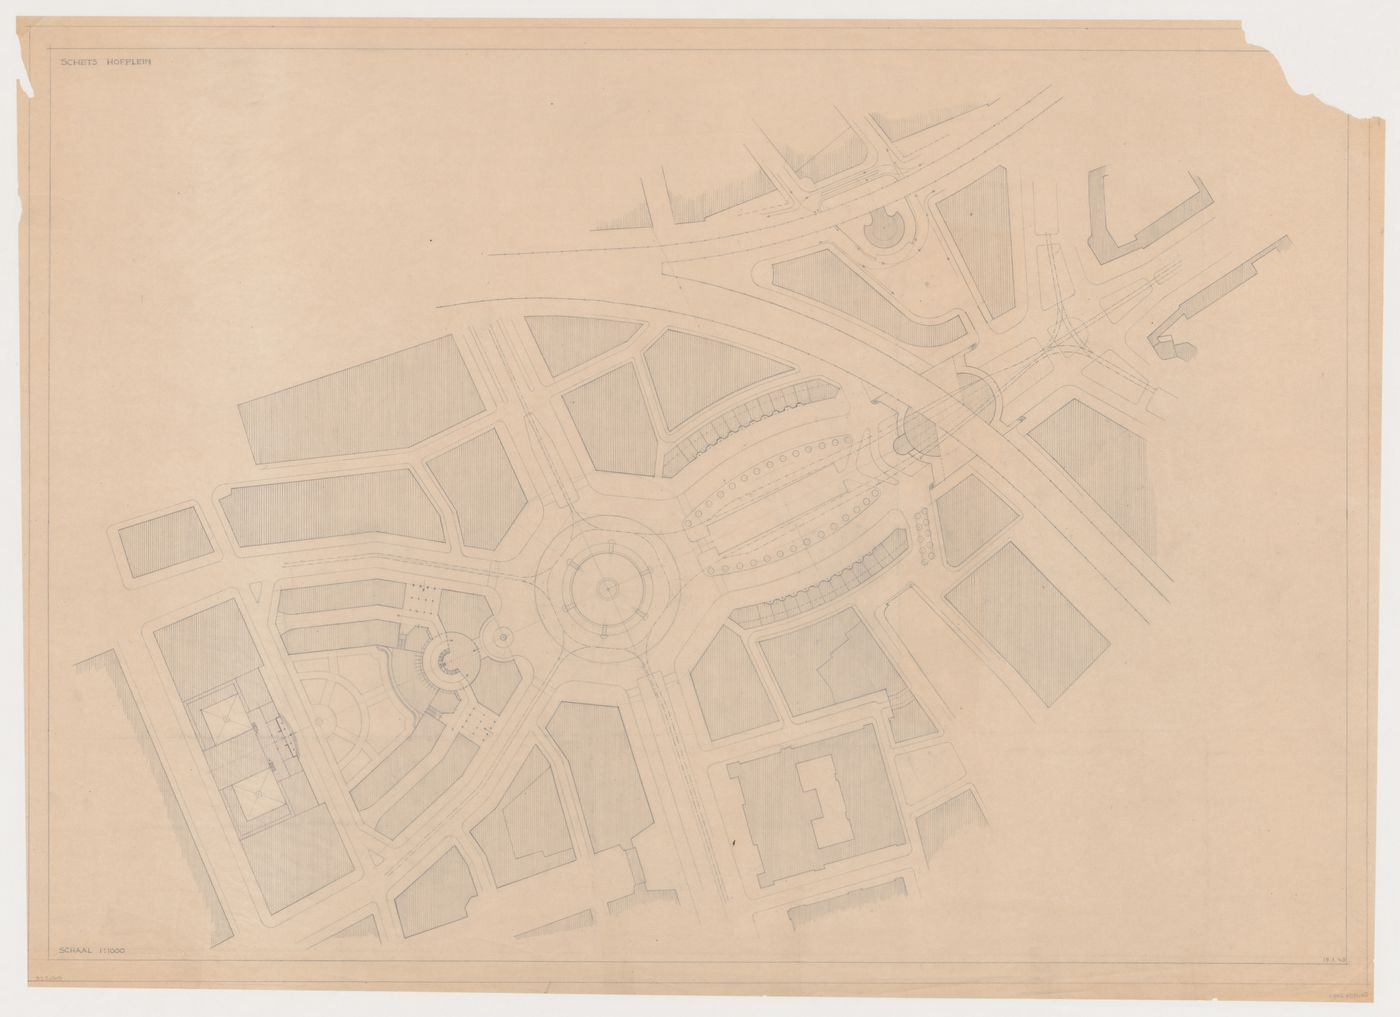 Site plan for the reconstruction of the Hofplein (city centre) showing Industriegebouw Plan B, other mixed-use developments, monument plaza and Café Viaduct, Rotterdam, Netherlands